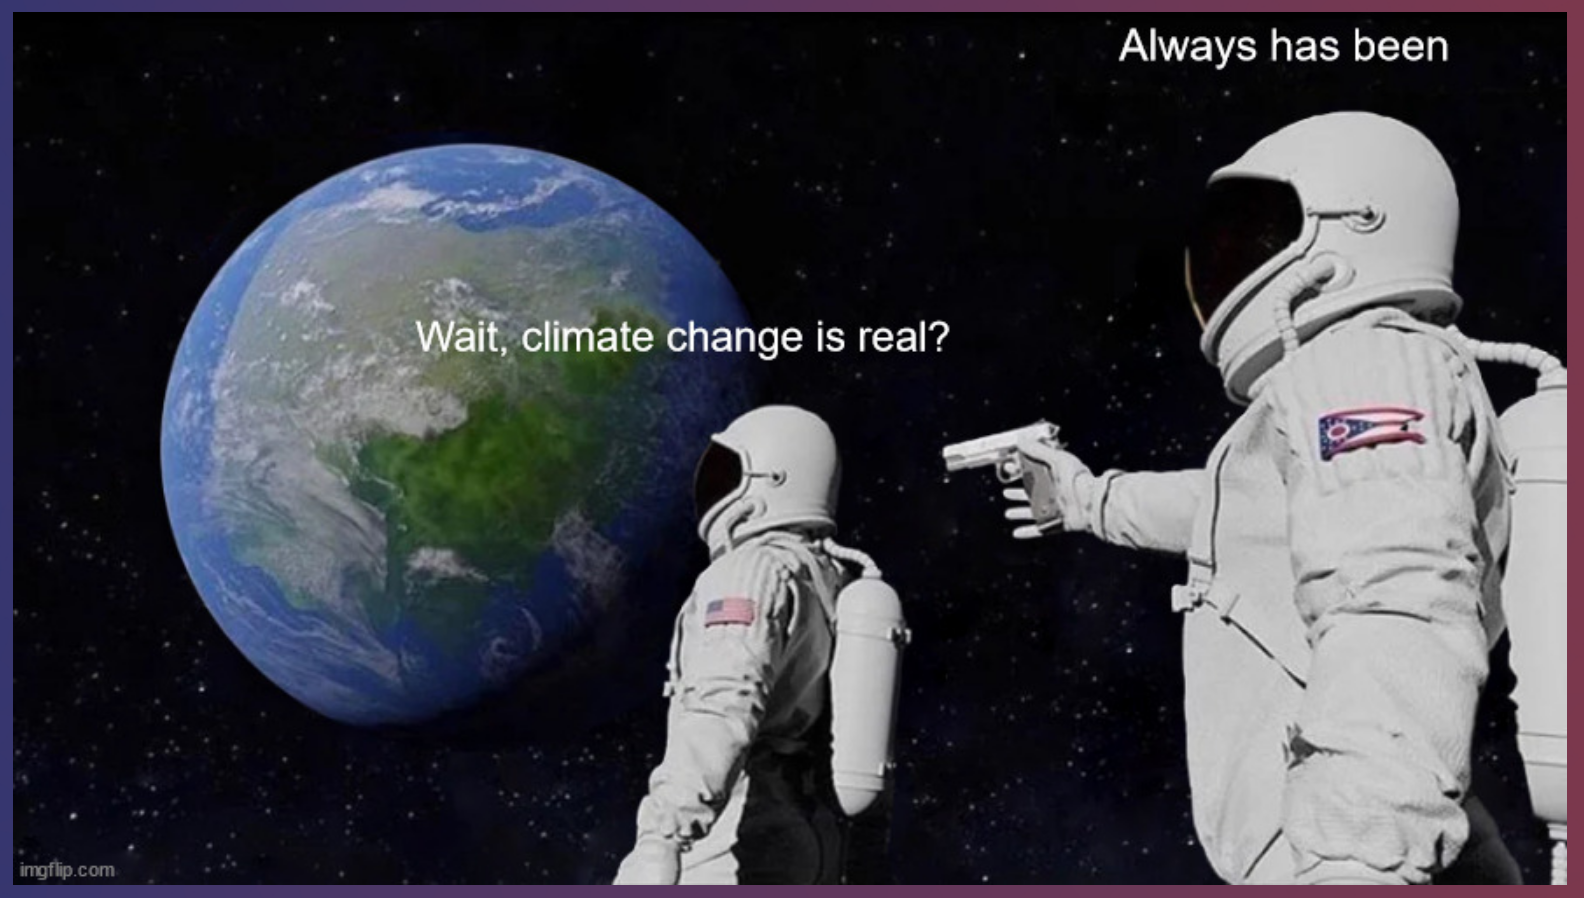 "Wait, climate change is real?" "Always has been"